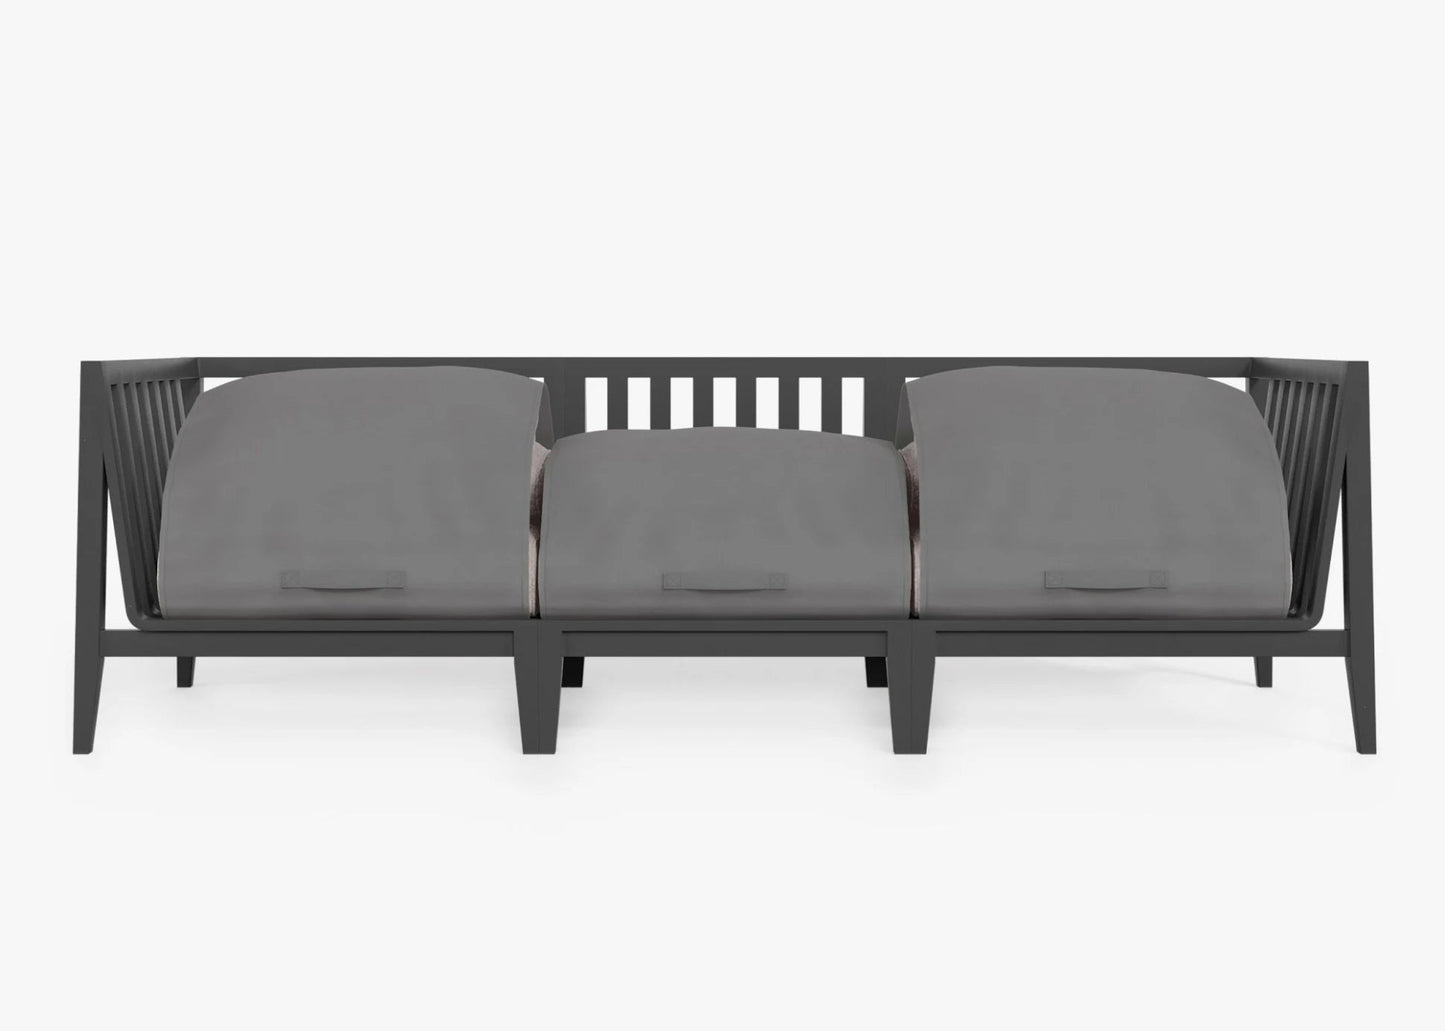 Live Outer 98" Charcoal Aluminum Outdoor 3-Seat Sofa With Sandstone Gray Cushion